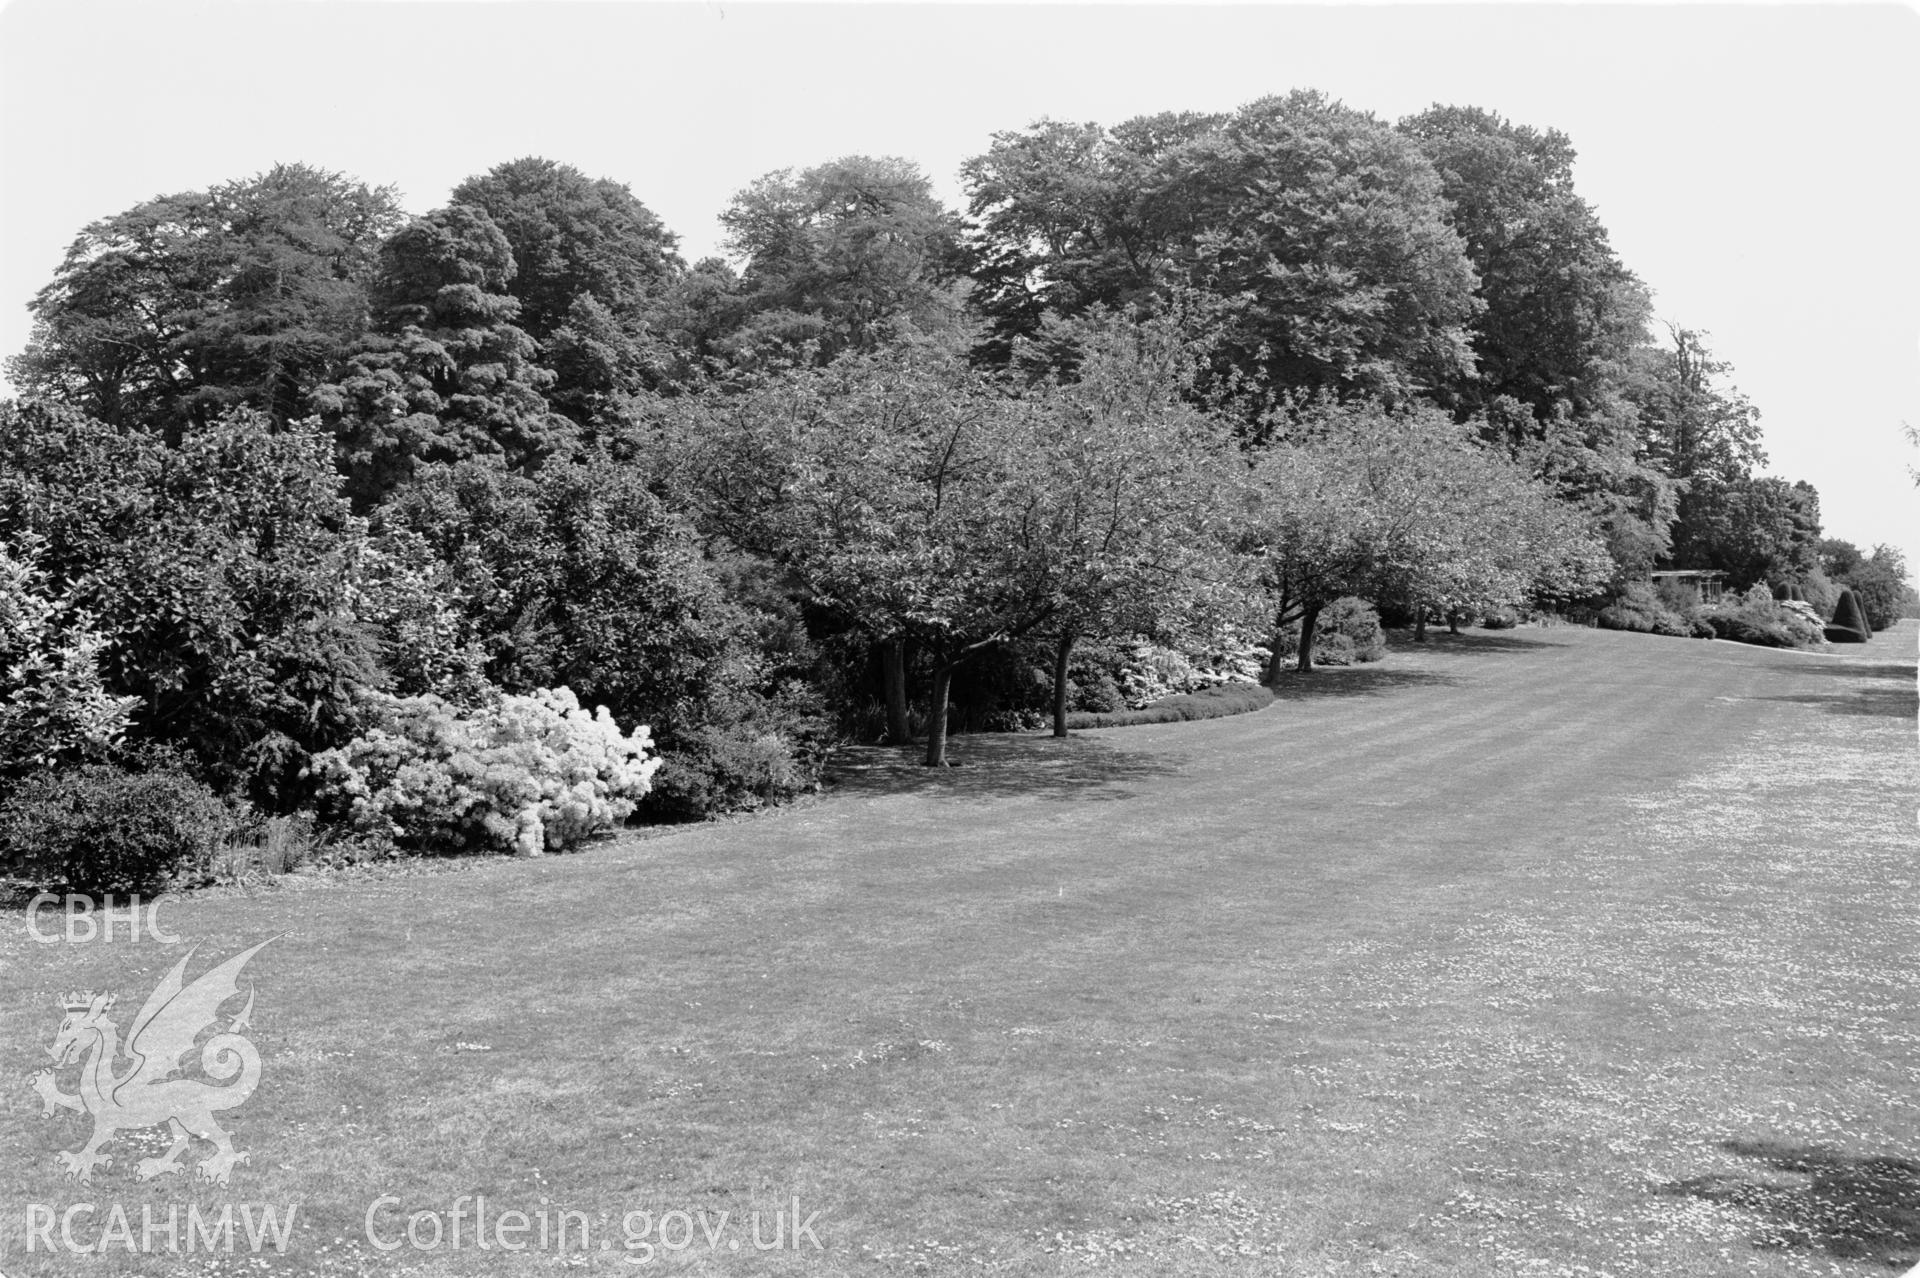 Chirk Castle grounds, collated by the former Central Office of Information.